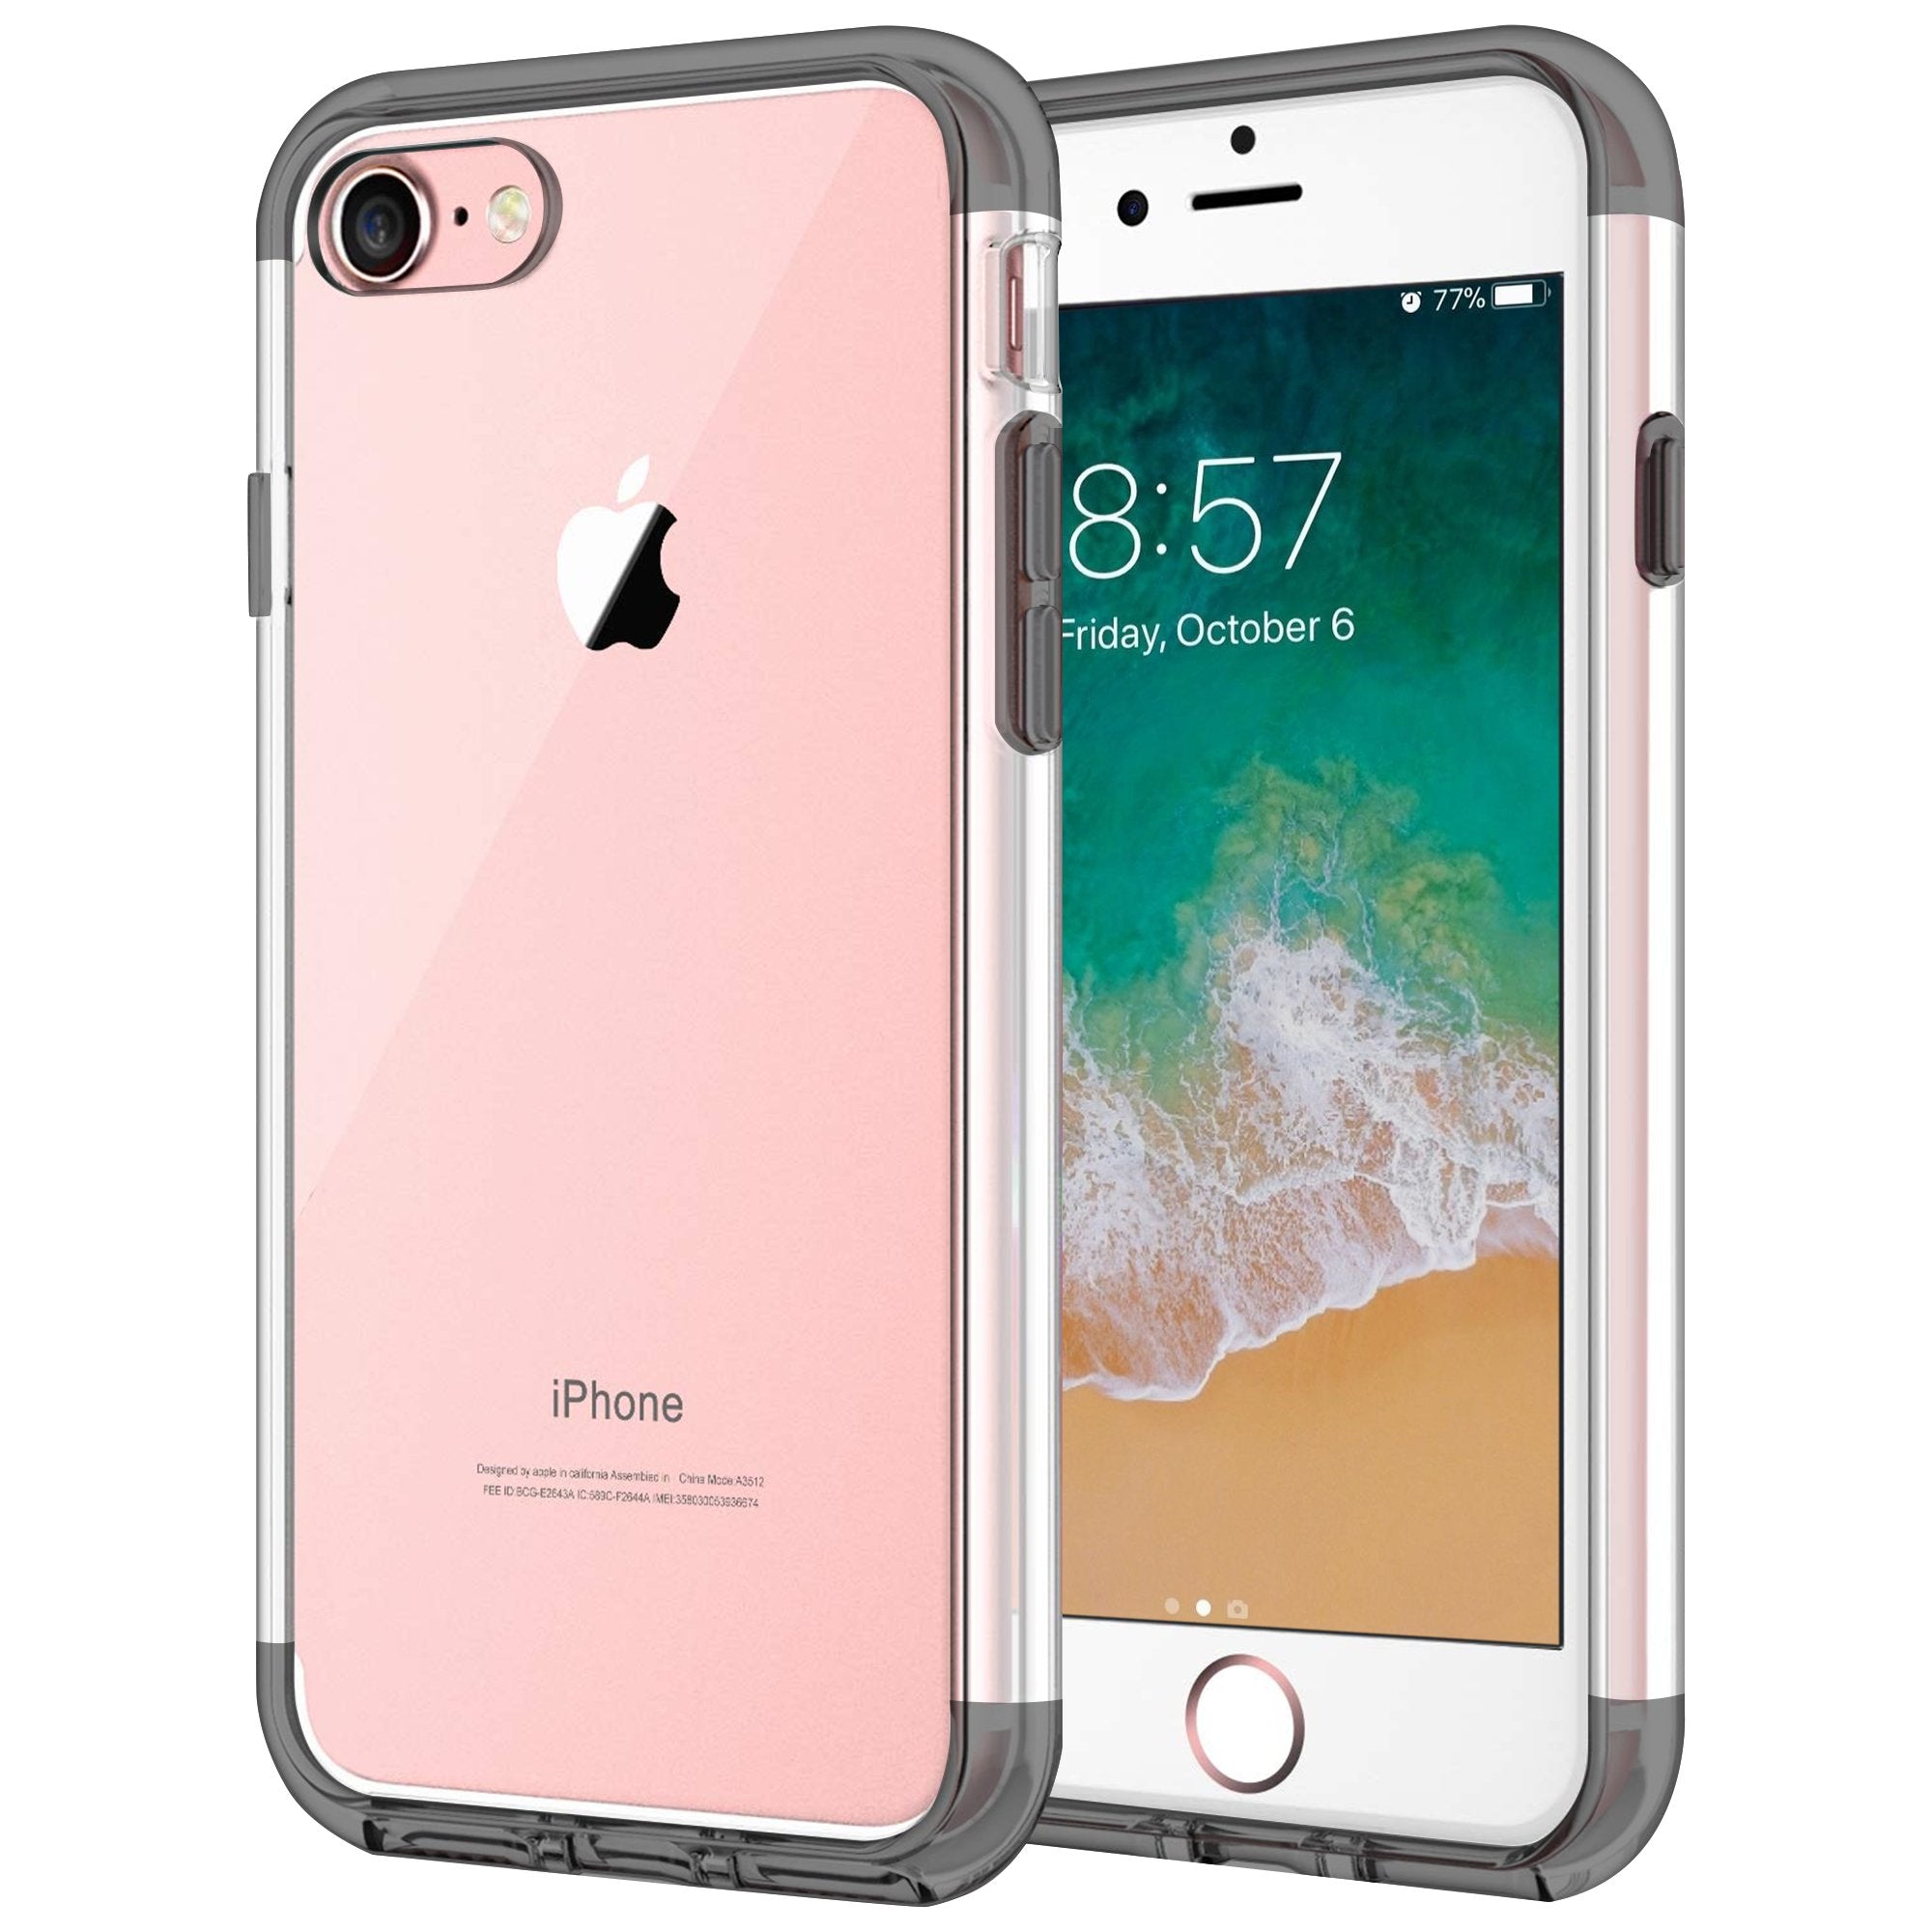 Case for iPhone 7 Shock Proof Soft TPU Silicone Phone Clear Slim Cover